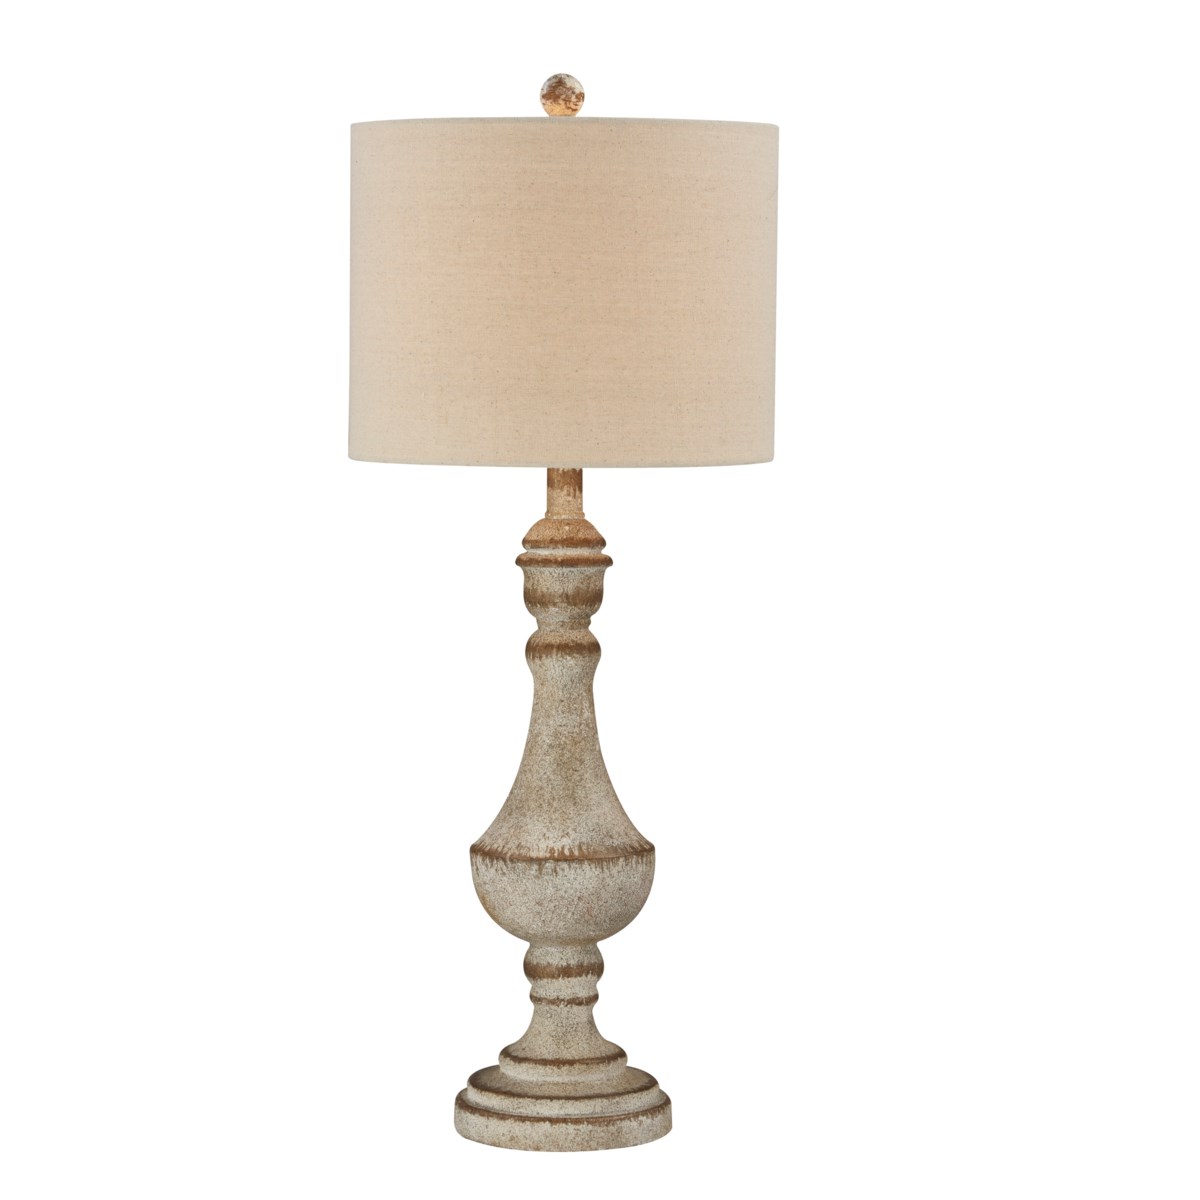 70947 Forty West Stevie 30 Table Lamp Rudd Furniture